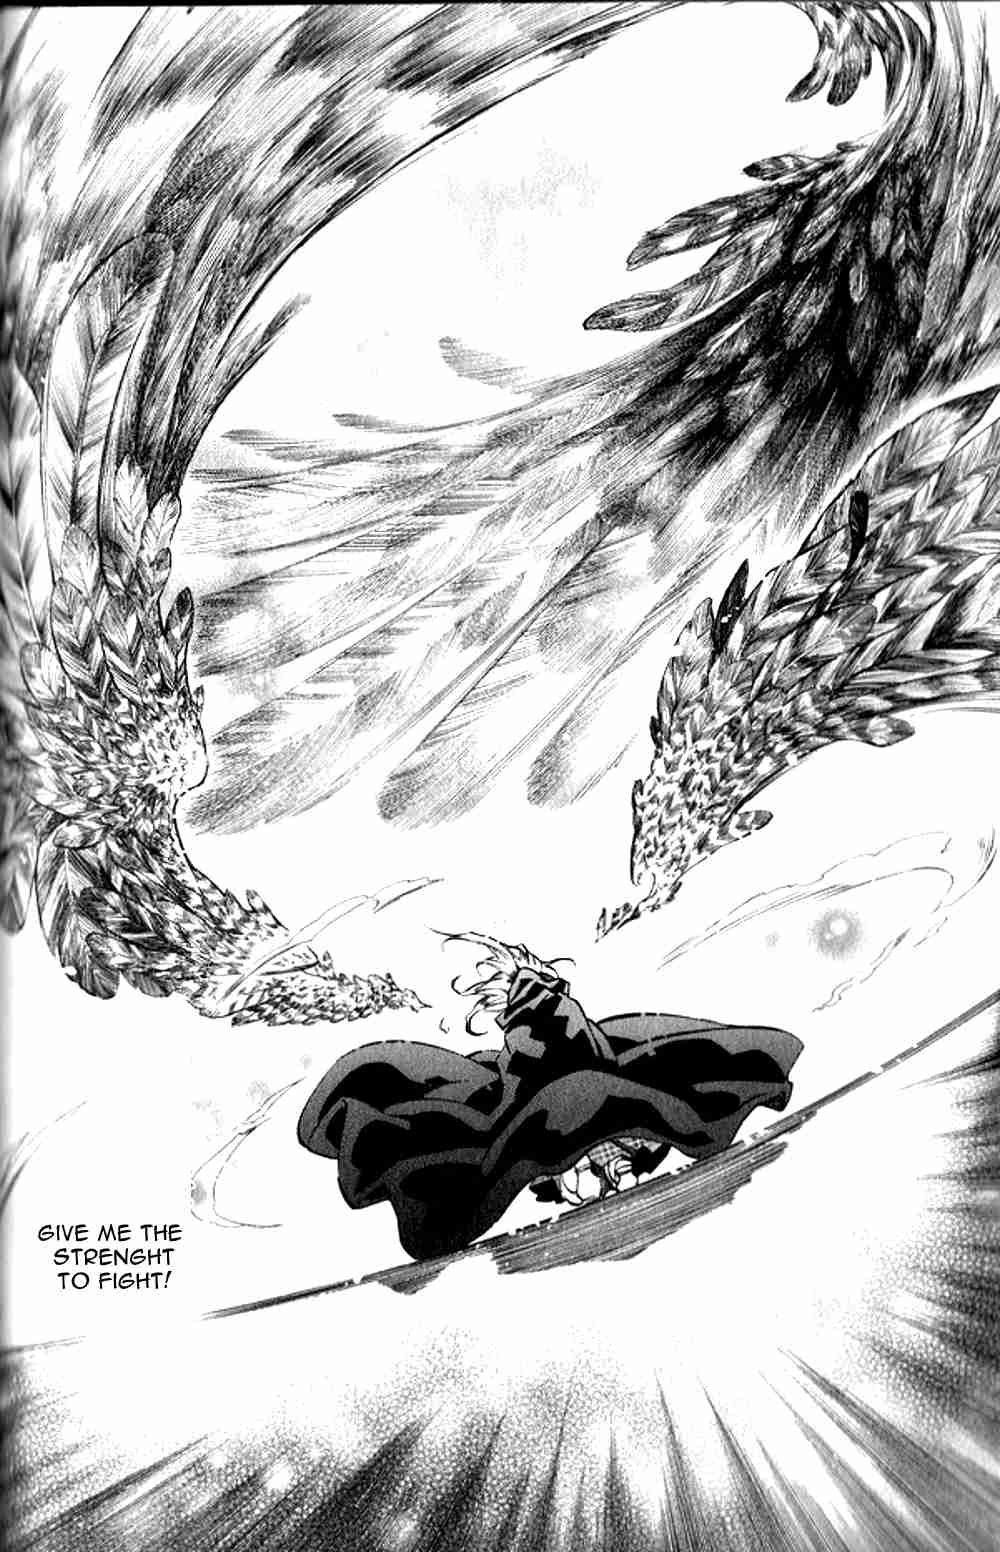 Karneval Ch. 124 Spread the wings of your oath